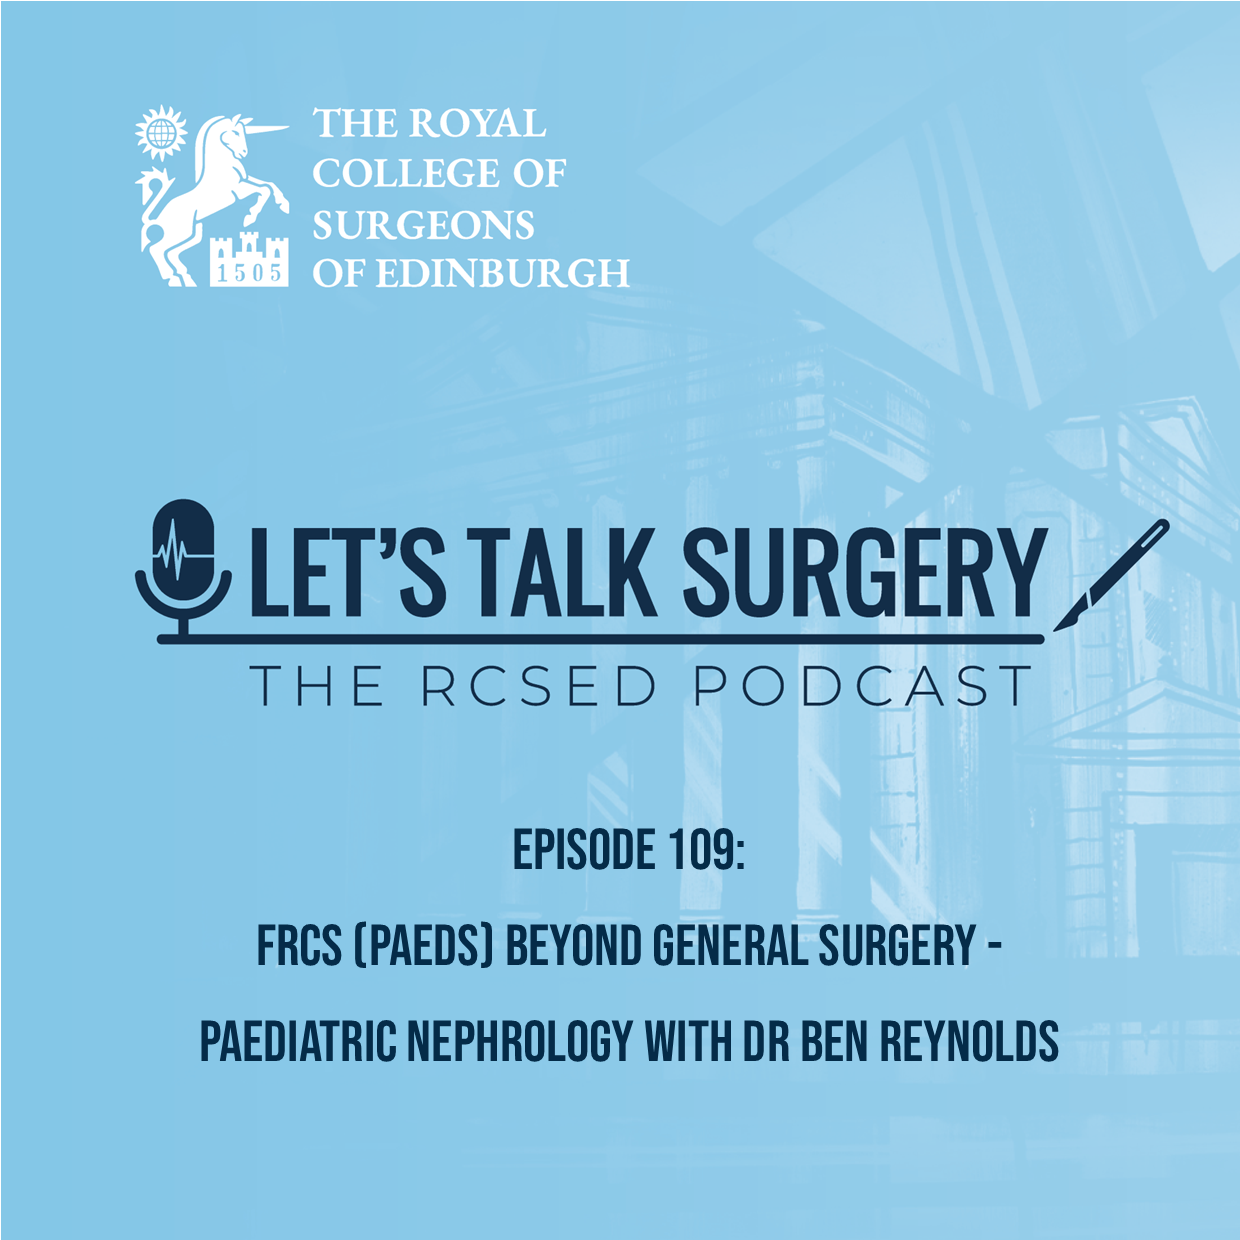 FRCS (Paeds) Beyond General Surgery - Paediatric Nephrology with Dr Ben Reynolds